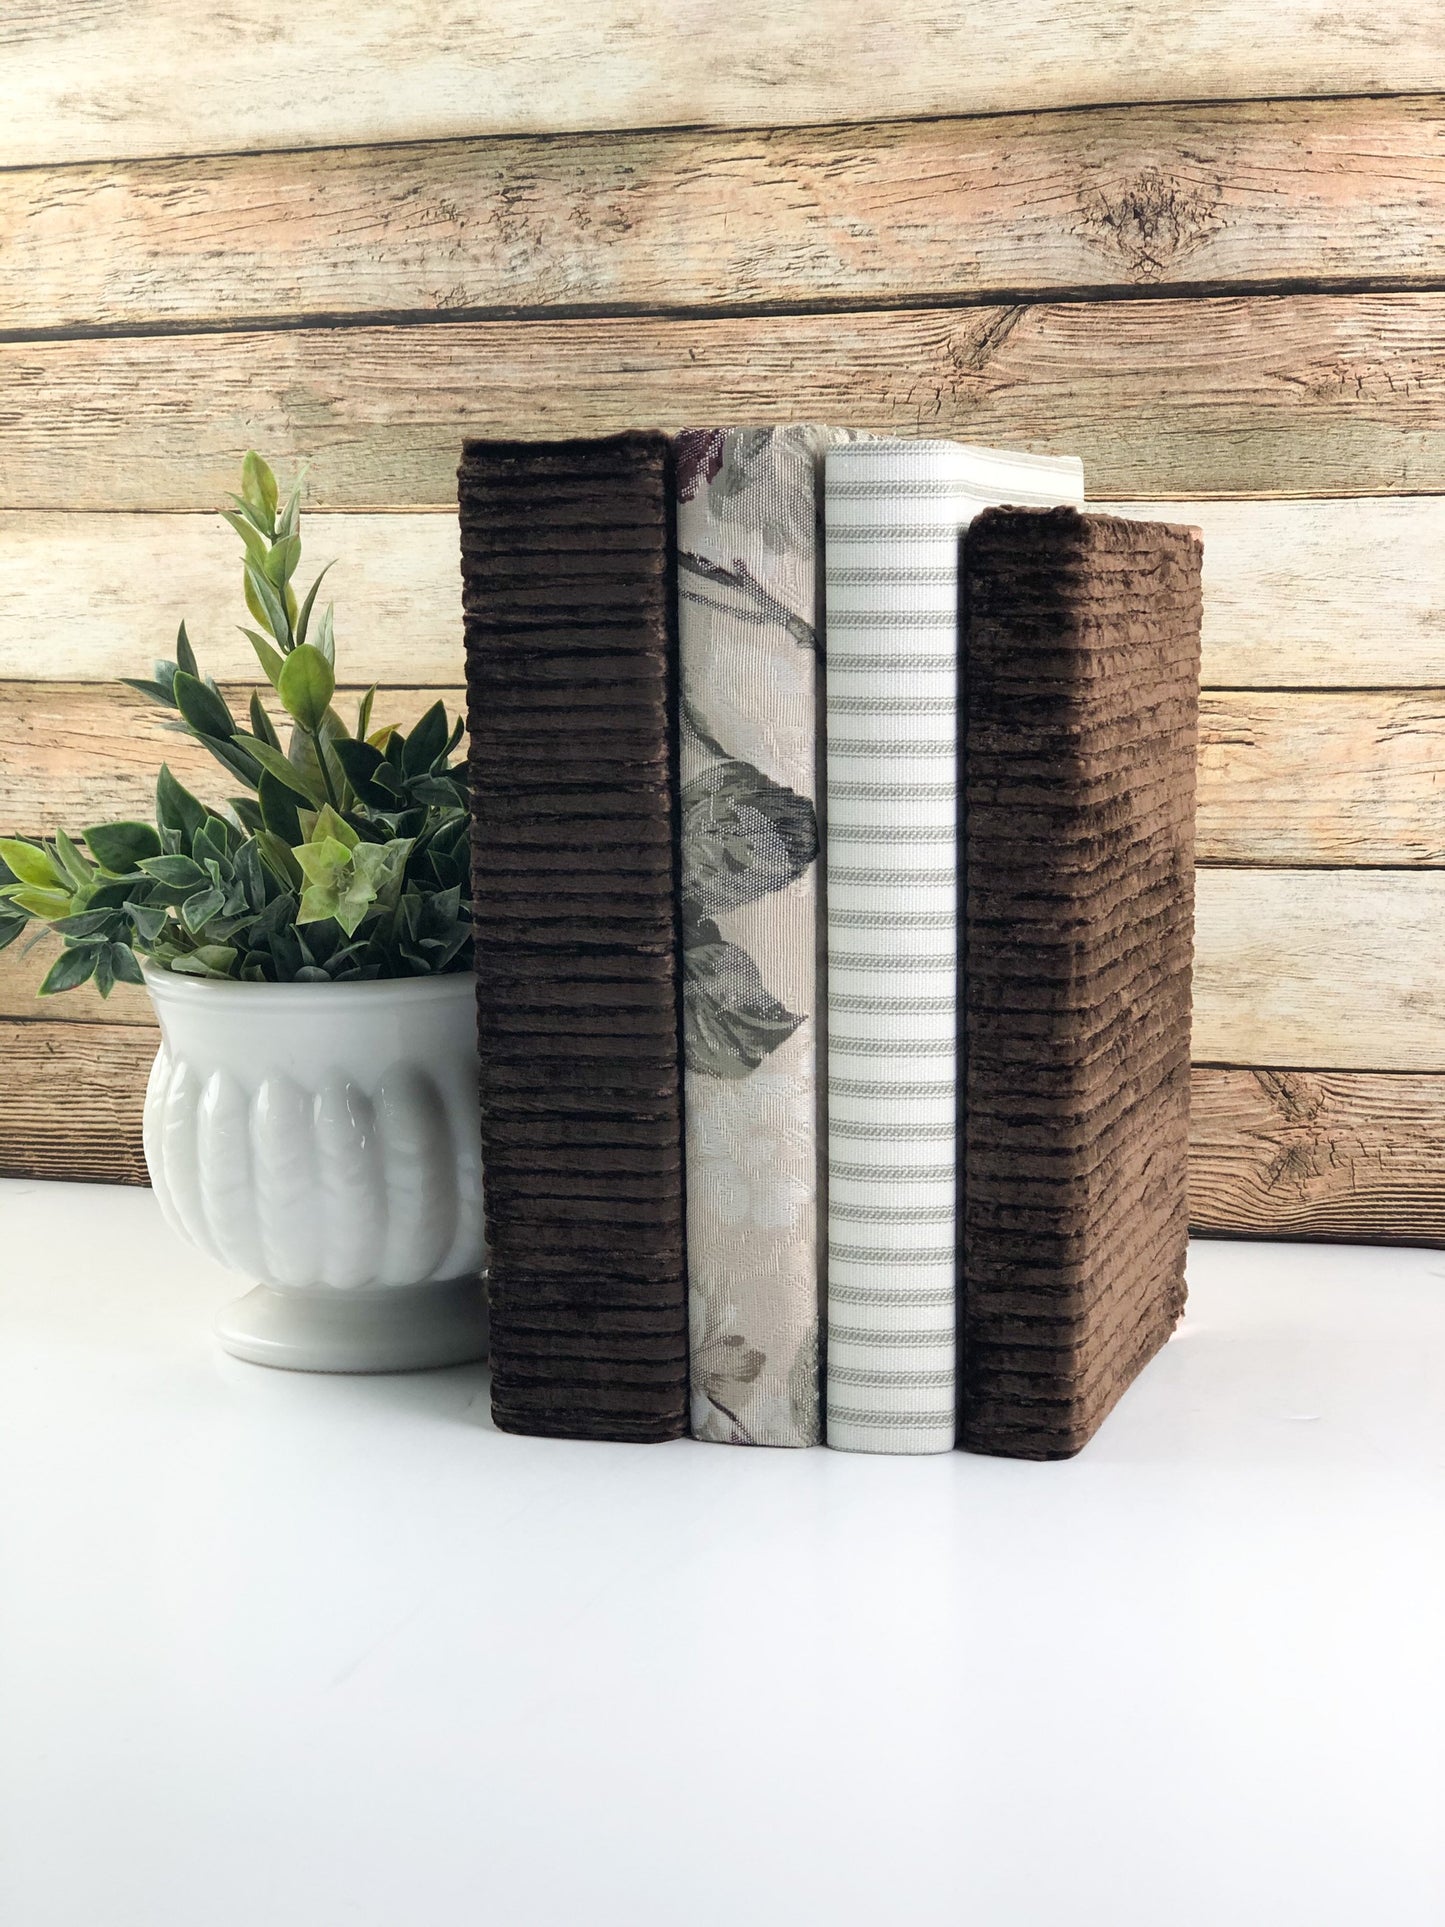 Brown Linen Covered Books / Neutral Home Decor